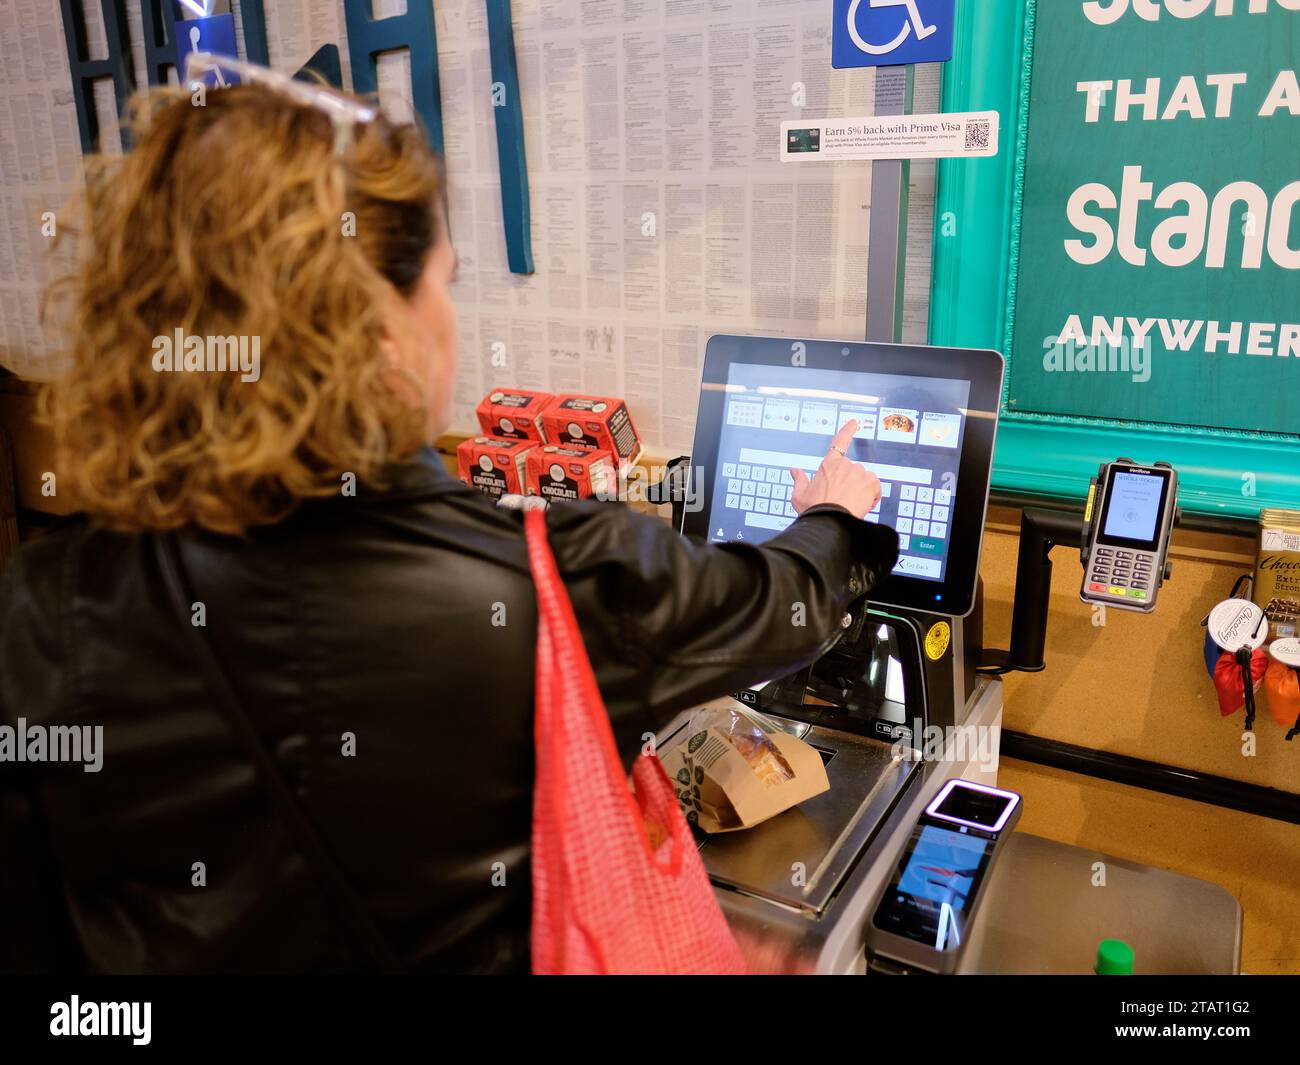 Woman customer checking out at an automated self-checkout register at a Whole Foods grocery store in San Francisco, California; using keypad. Stock Photo